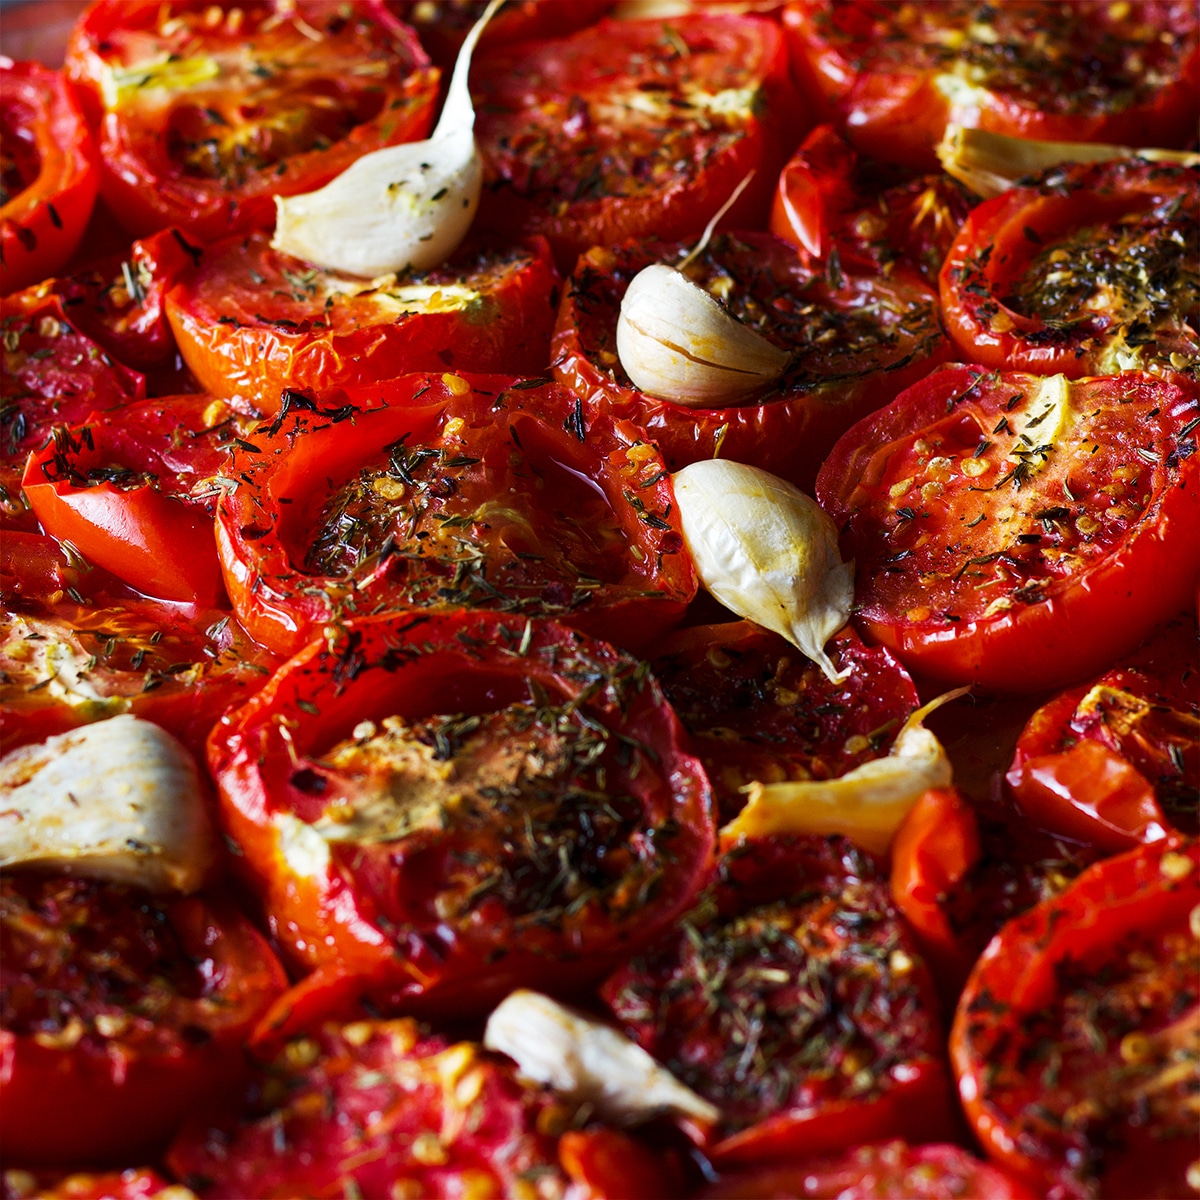 A tray of roasted tomatoes and garlic.